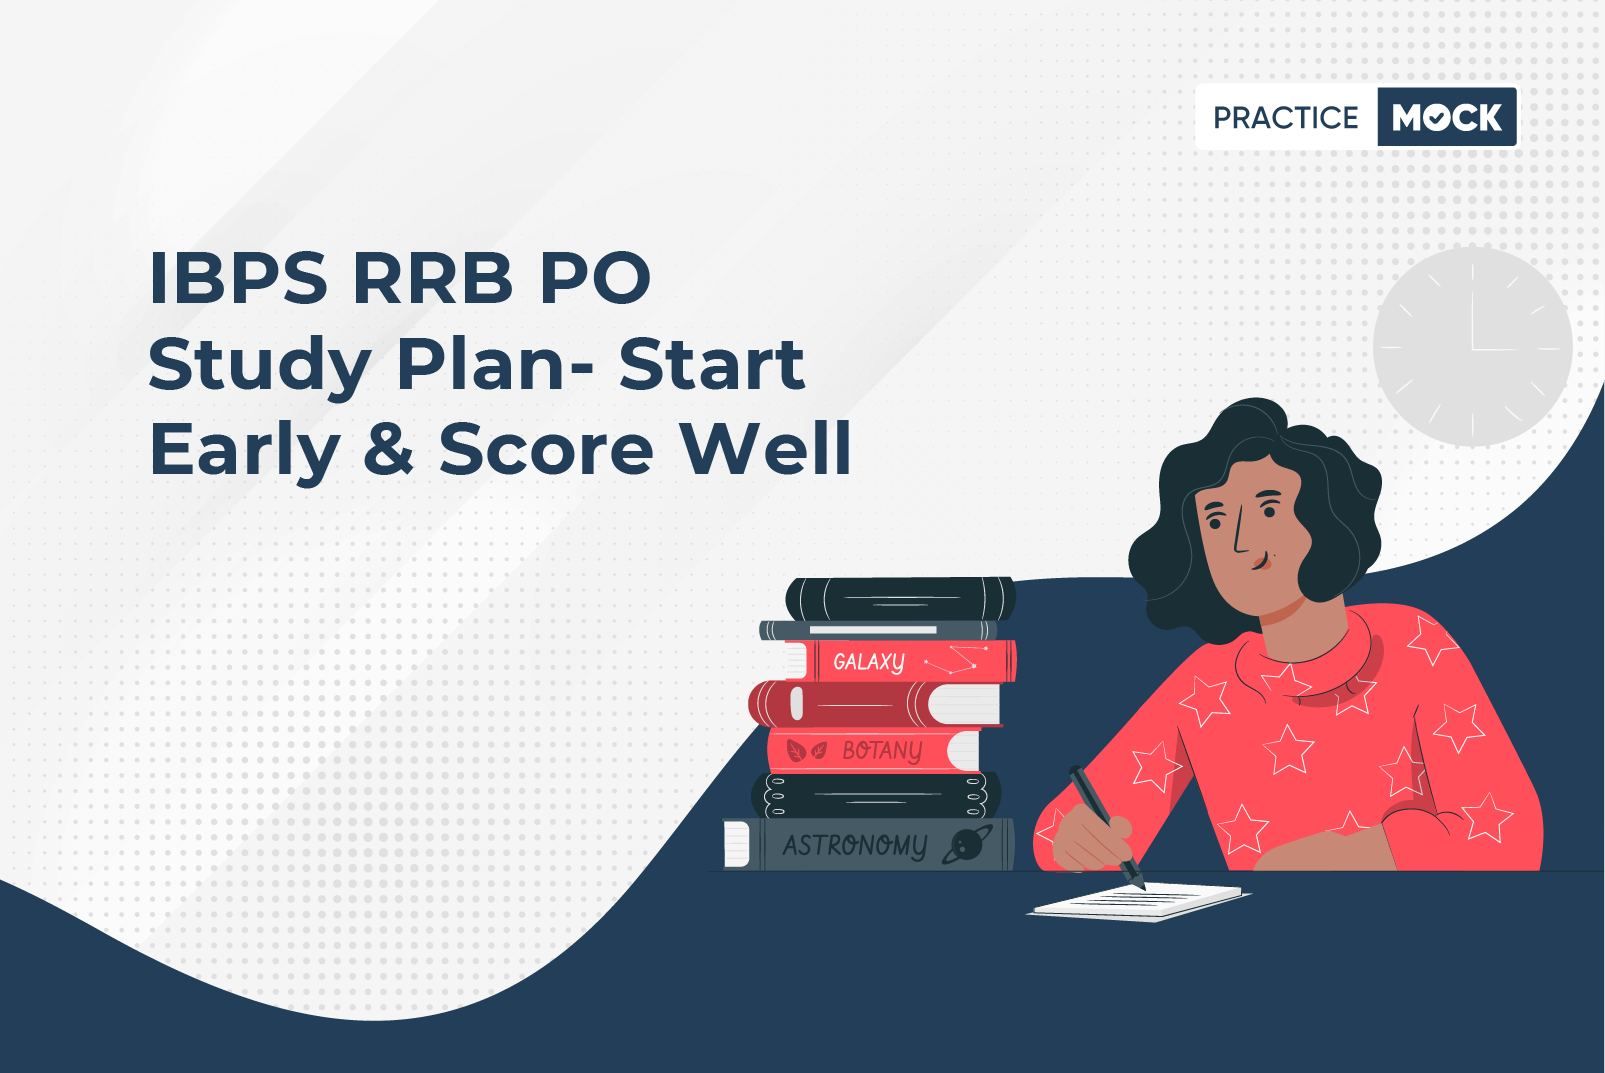 IBPS-RRB-PO-Study-Plan-Start-Early-Score-Well